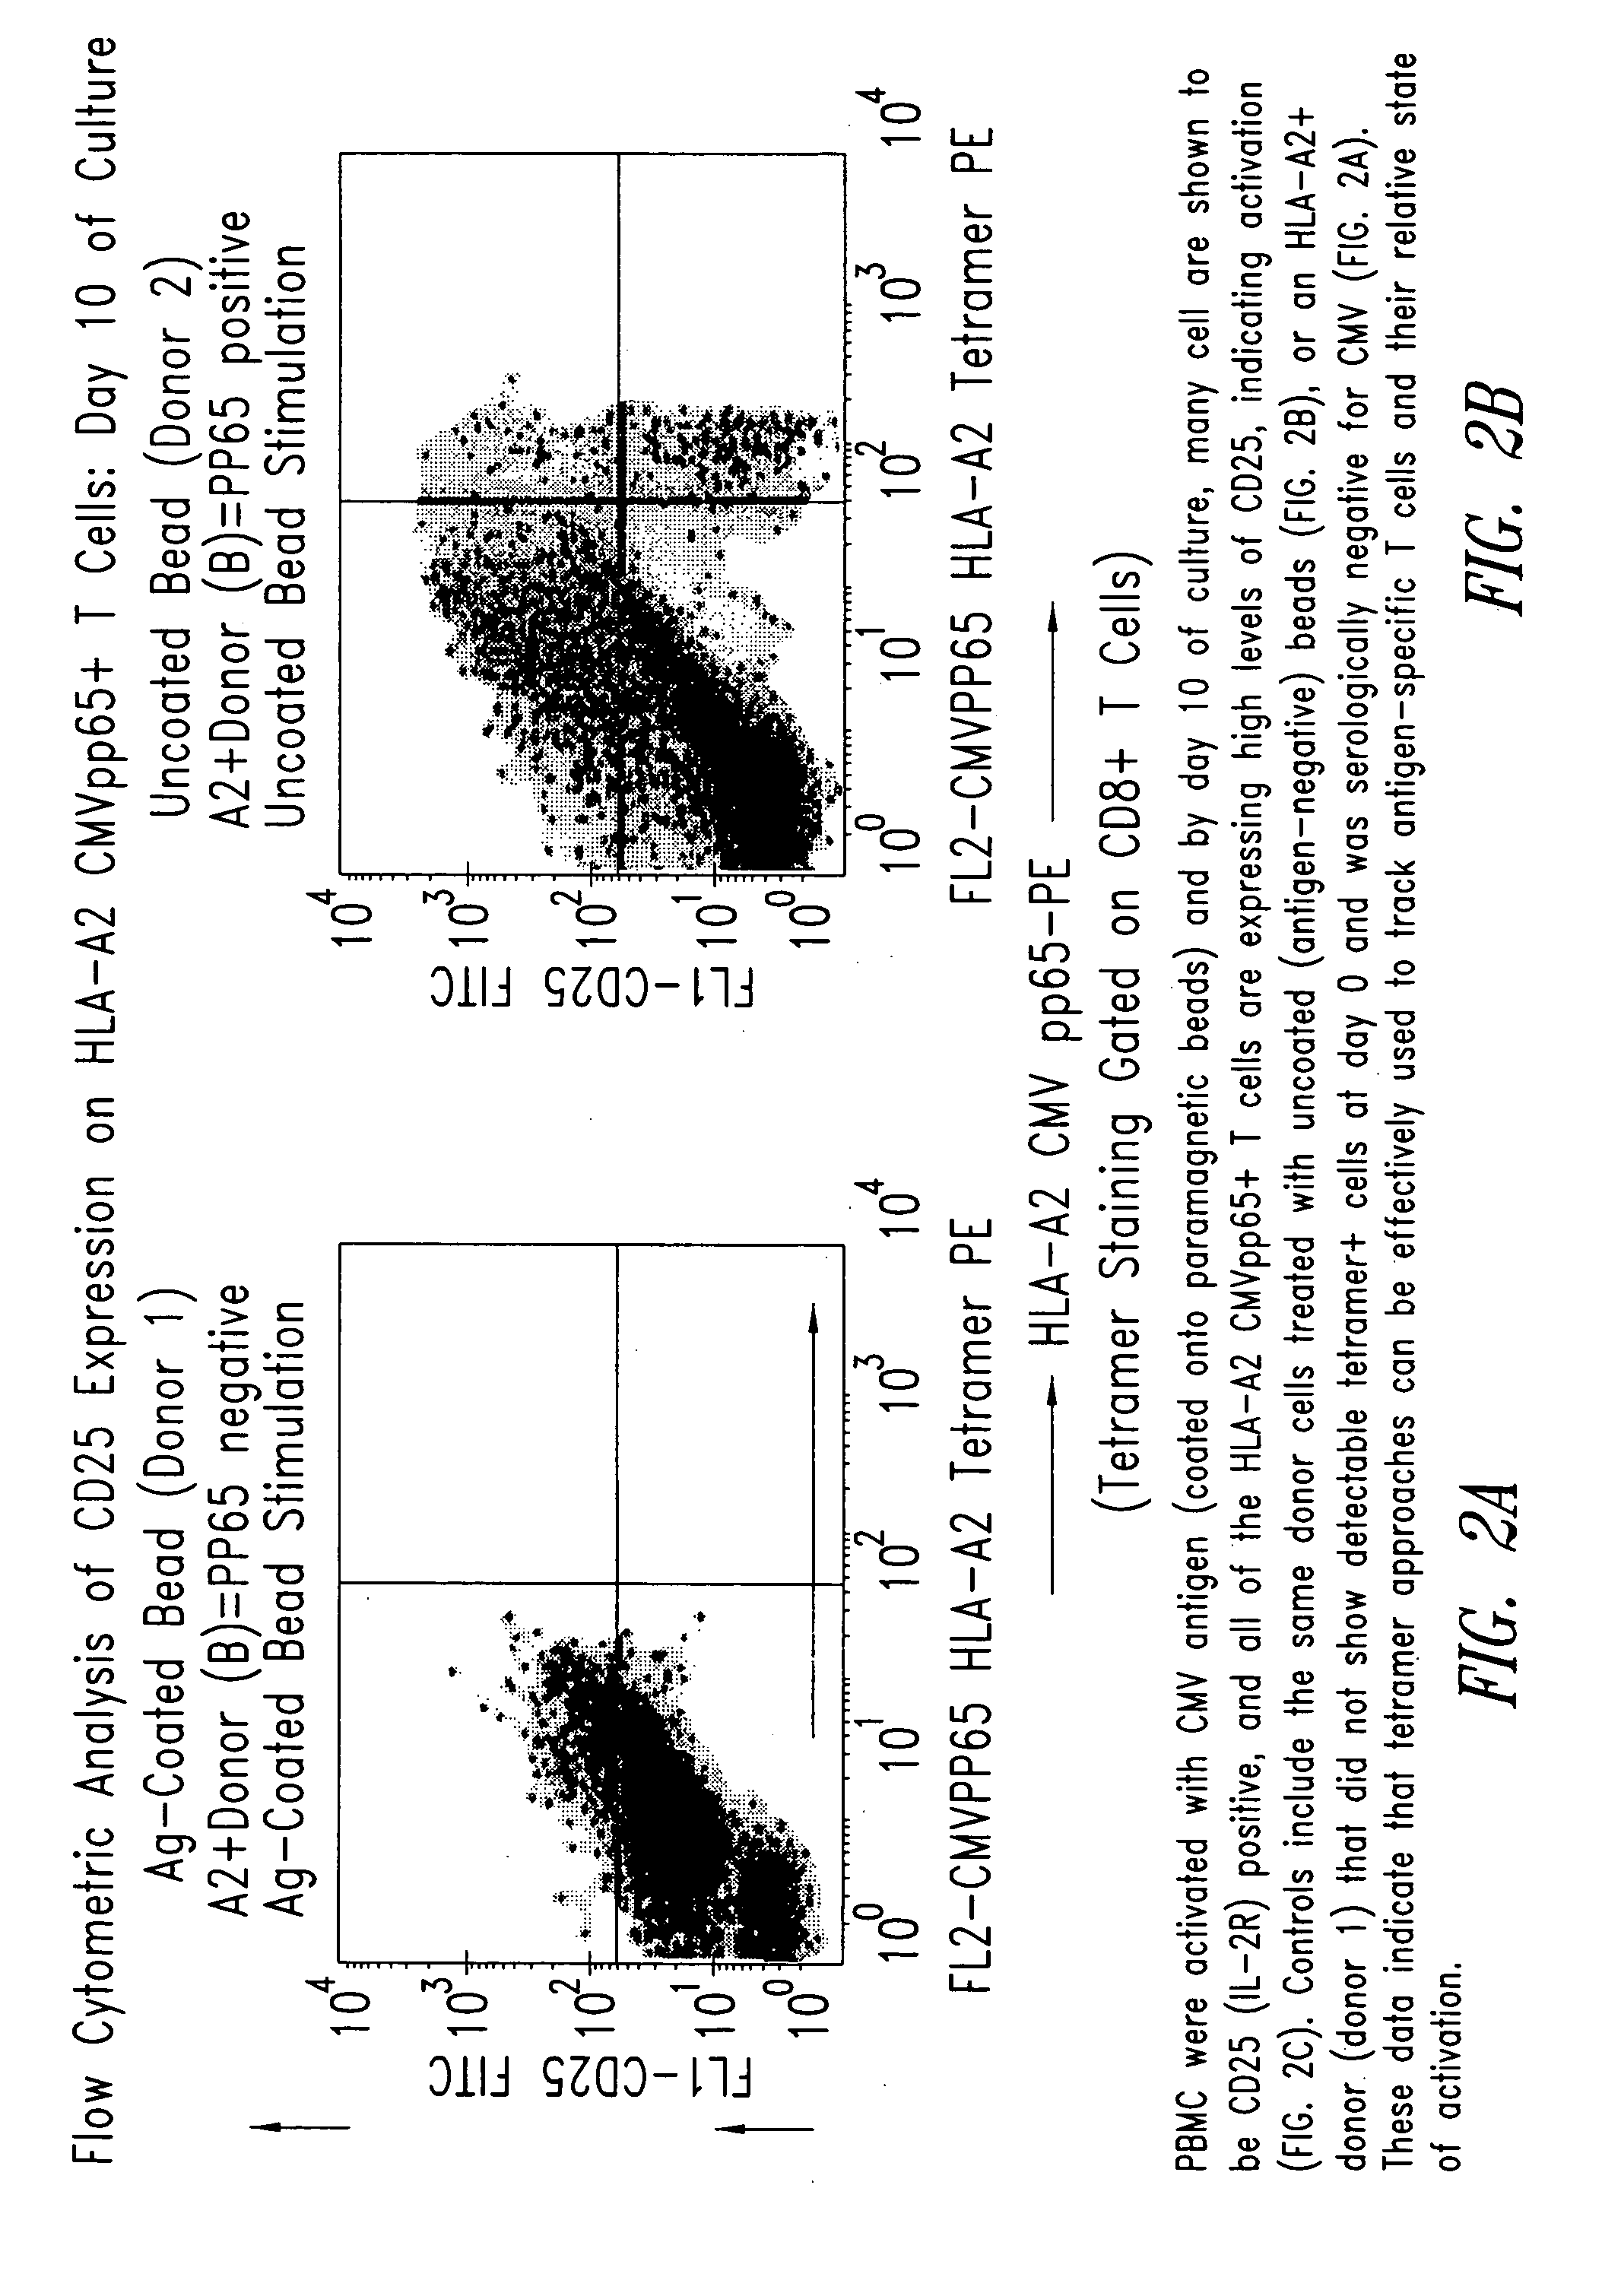 Compositions and methods for eliminating undesired subpopulations of T cells in patients with immunological defects related to autoimmunity and organ or hematopoietic stem cell transplantation